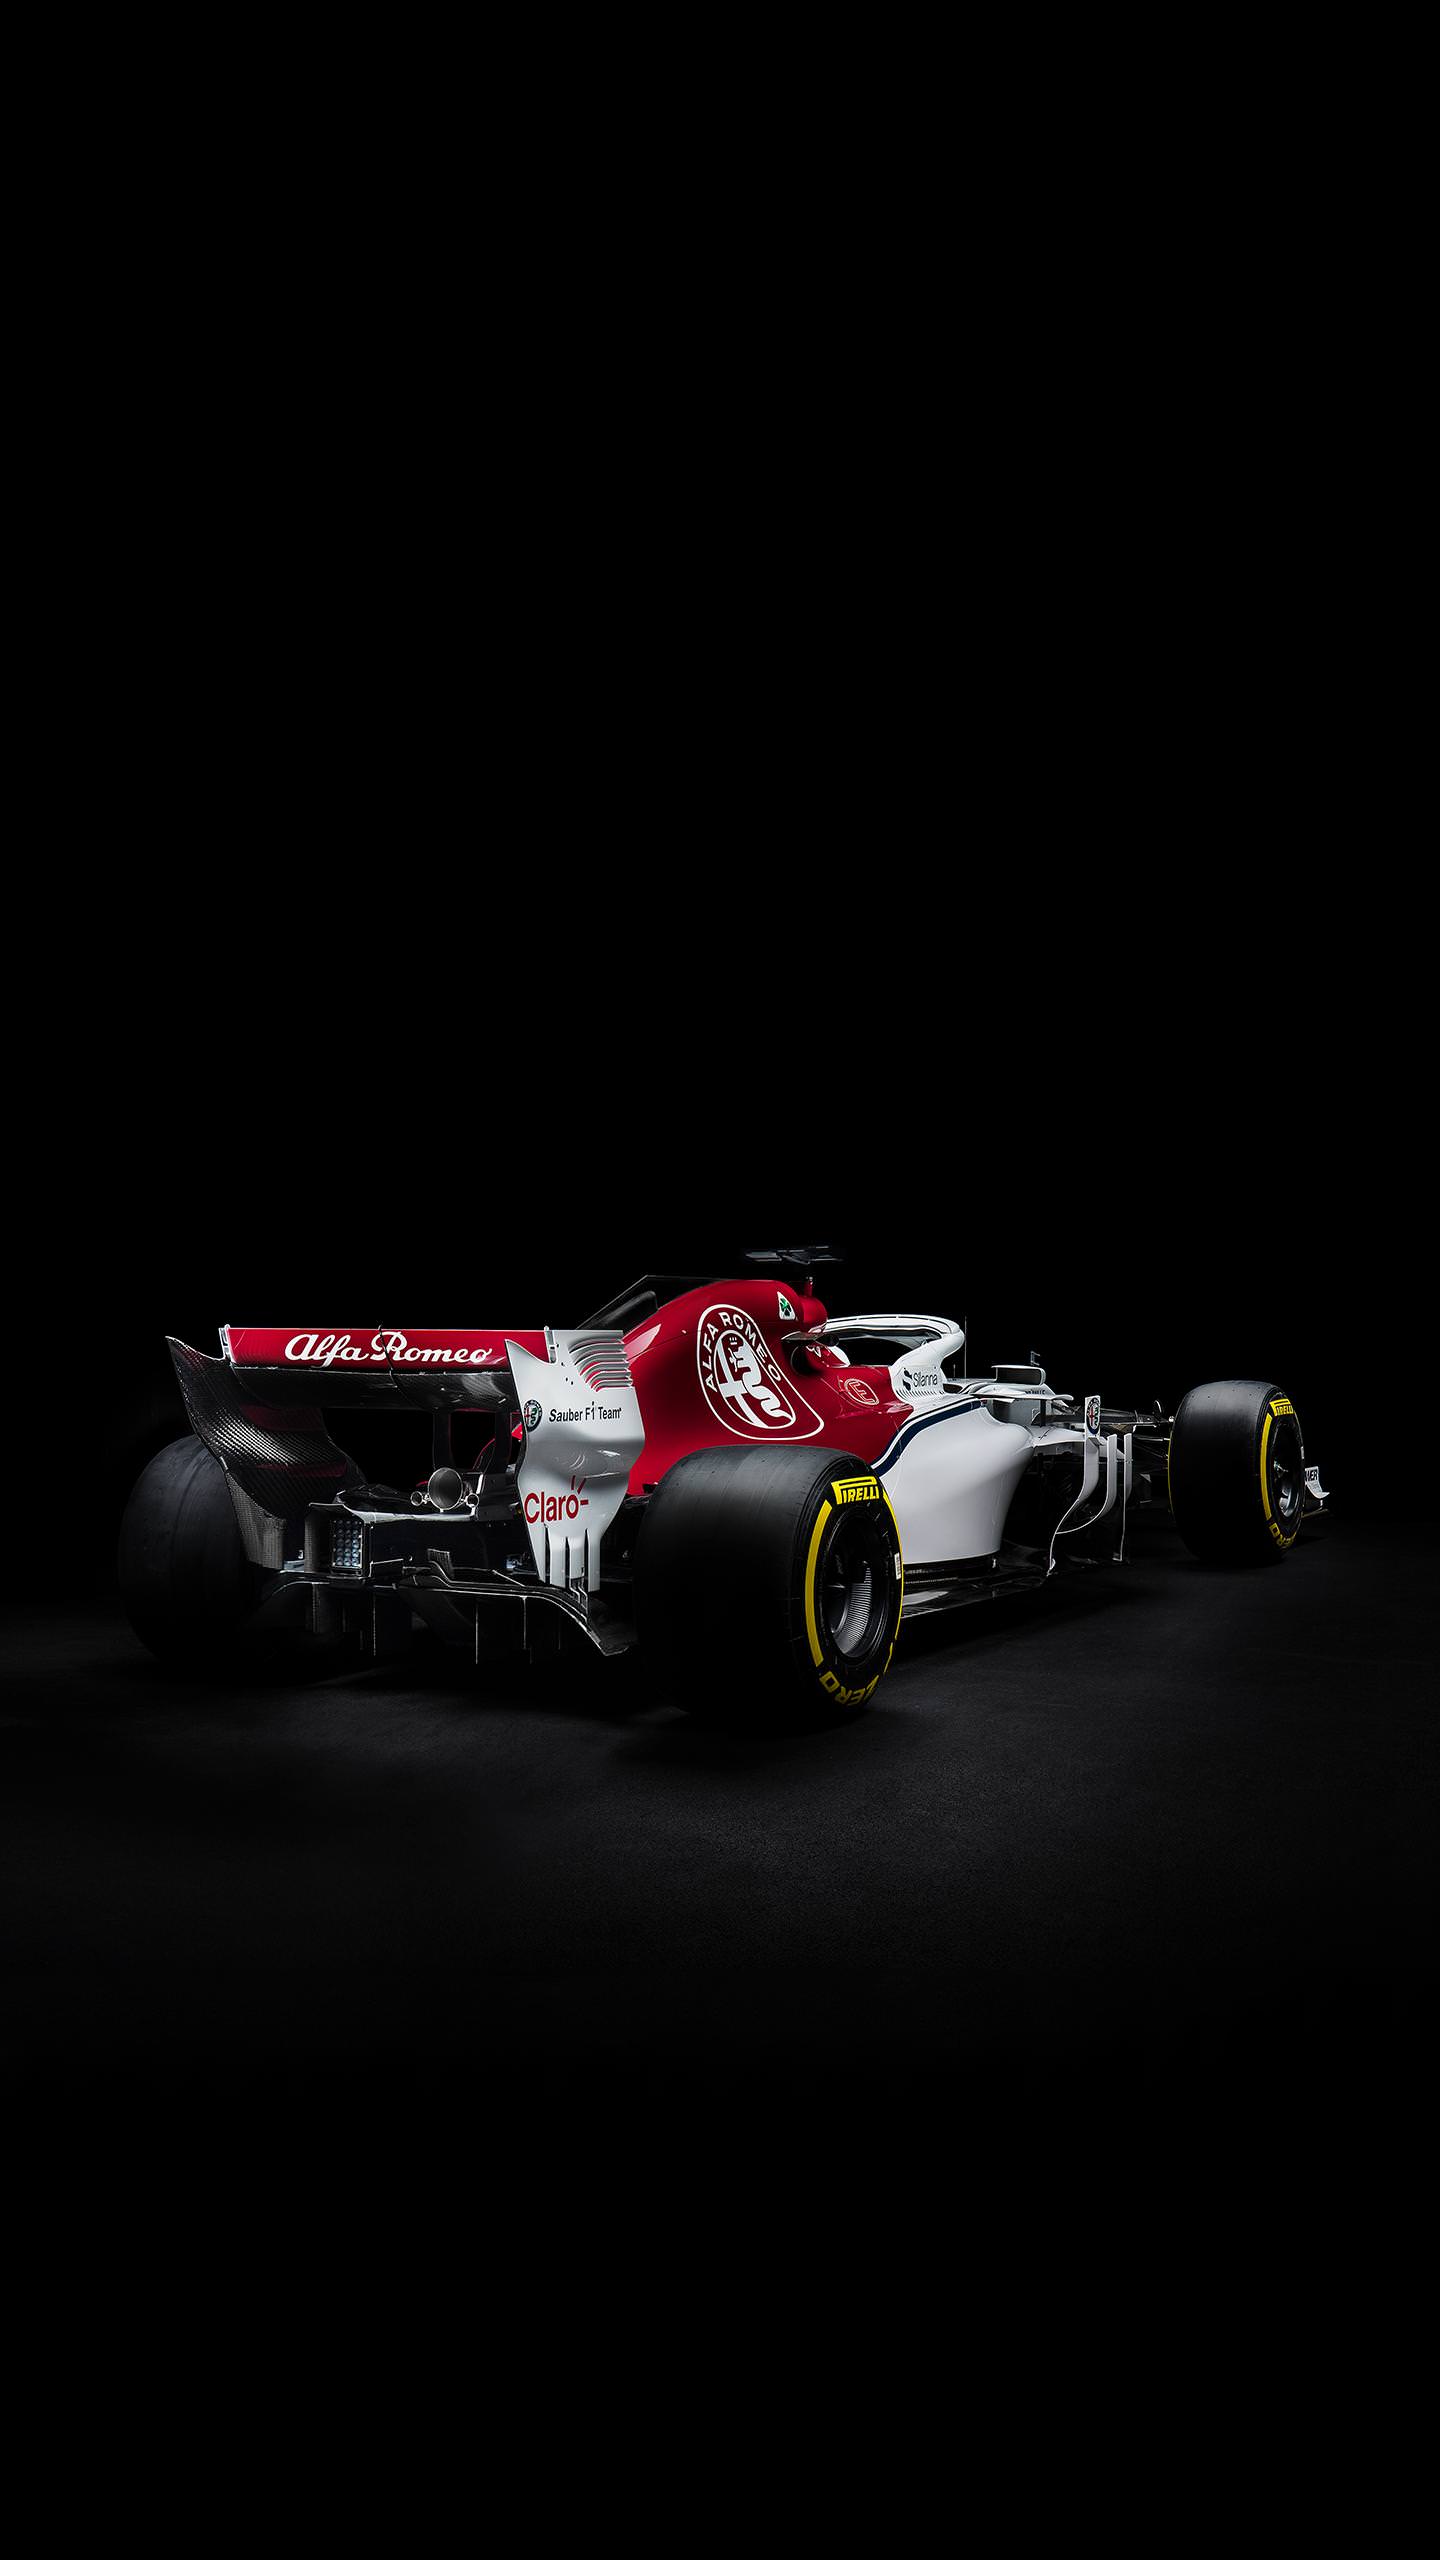 What F1 themed wallpaper do you guys have on your iPhone X, XS